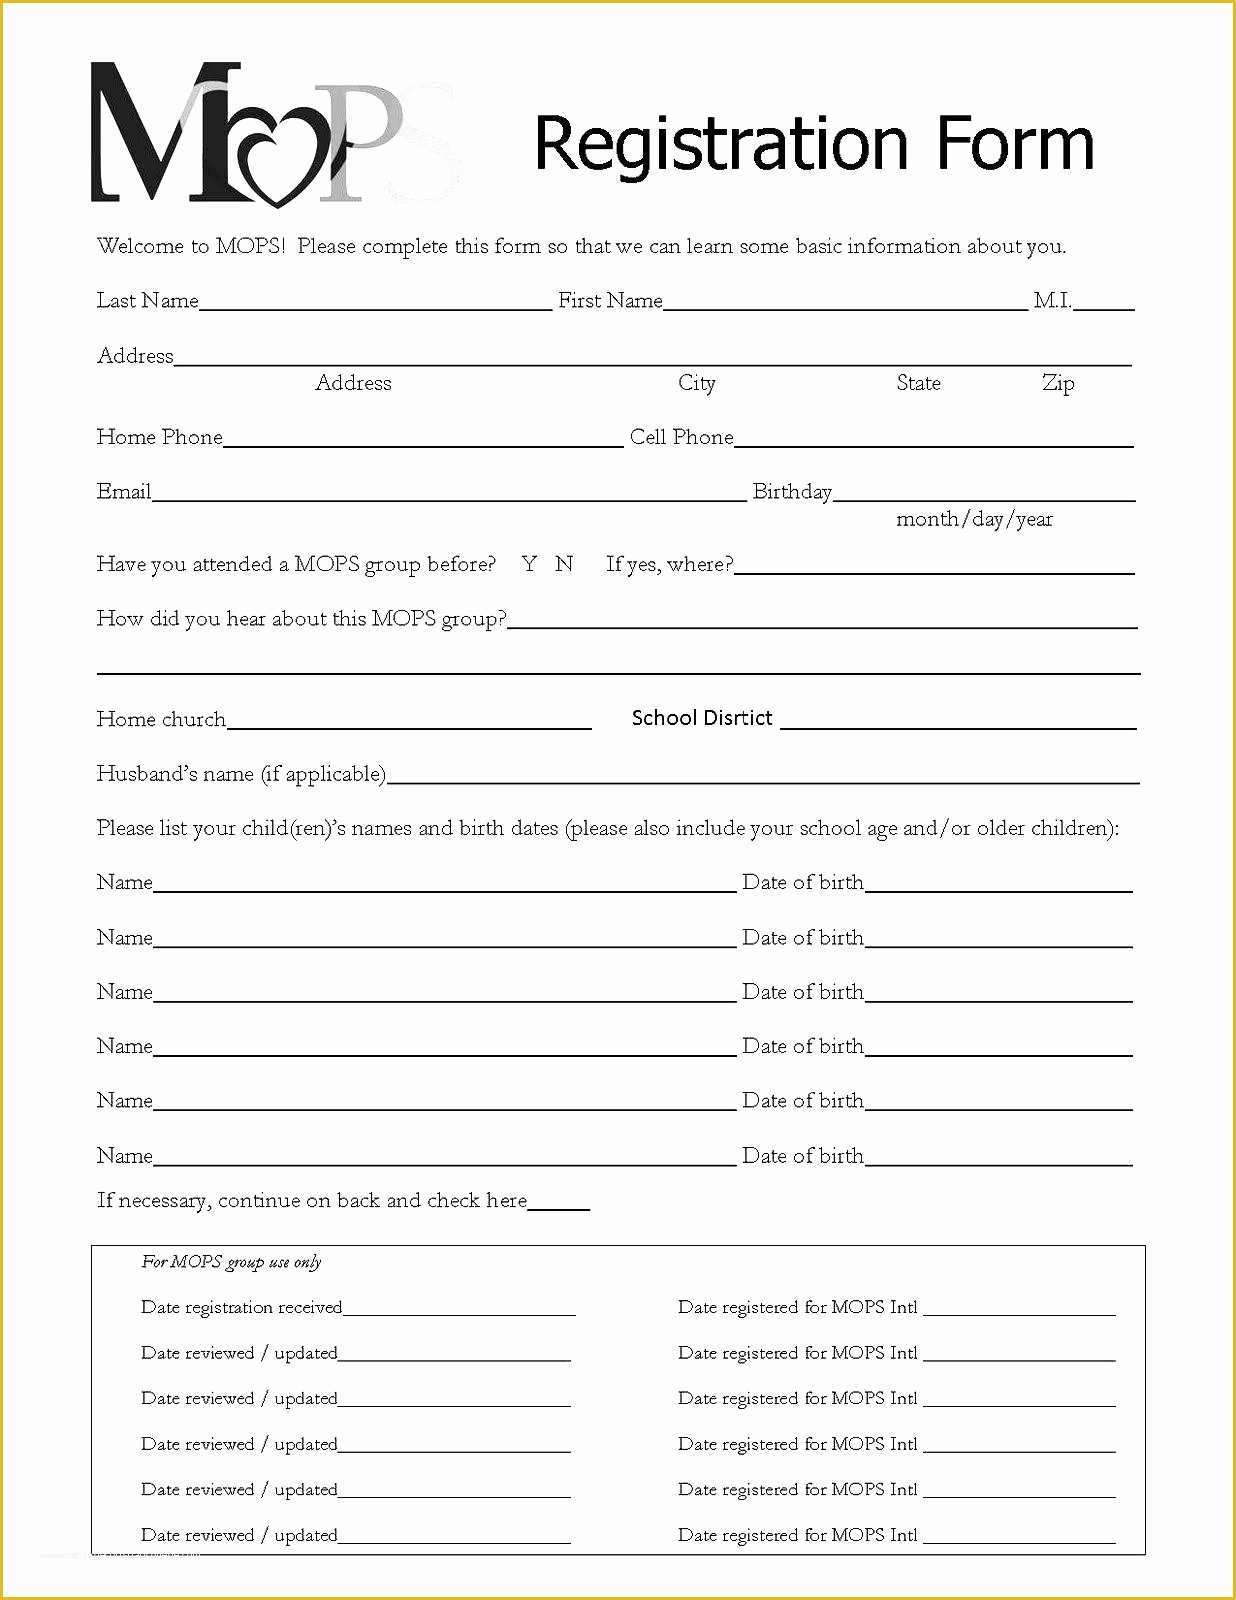 student-registration-form-pdf-fill-out-and-sign-printable-pdf